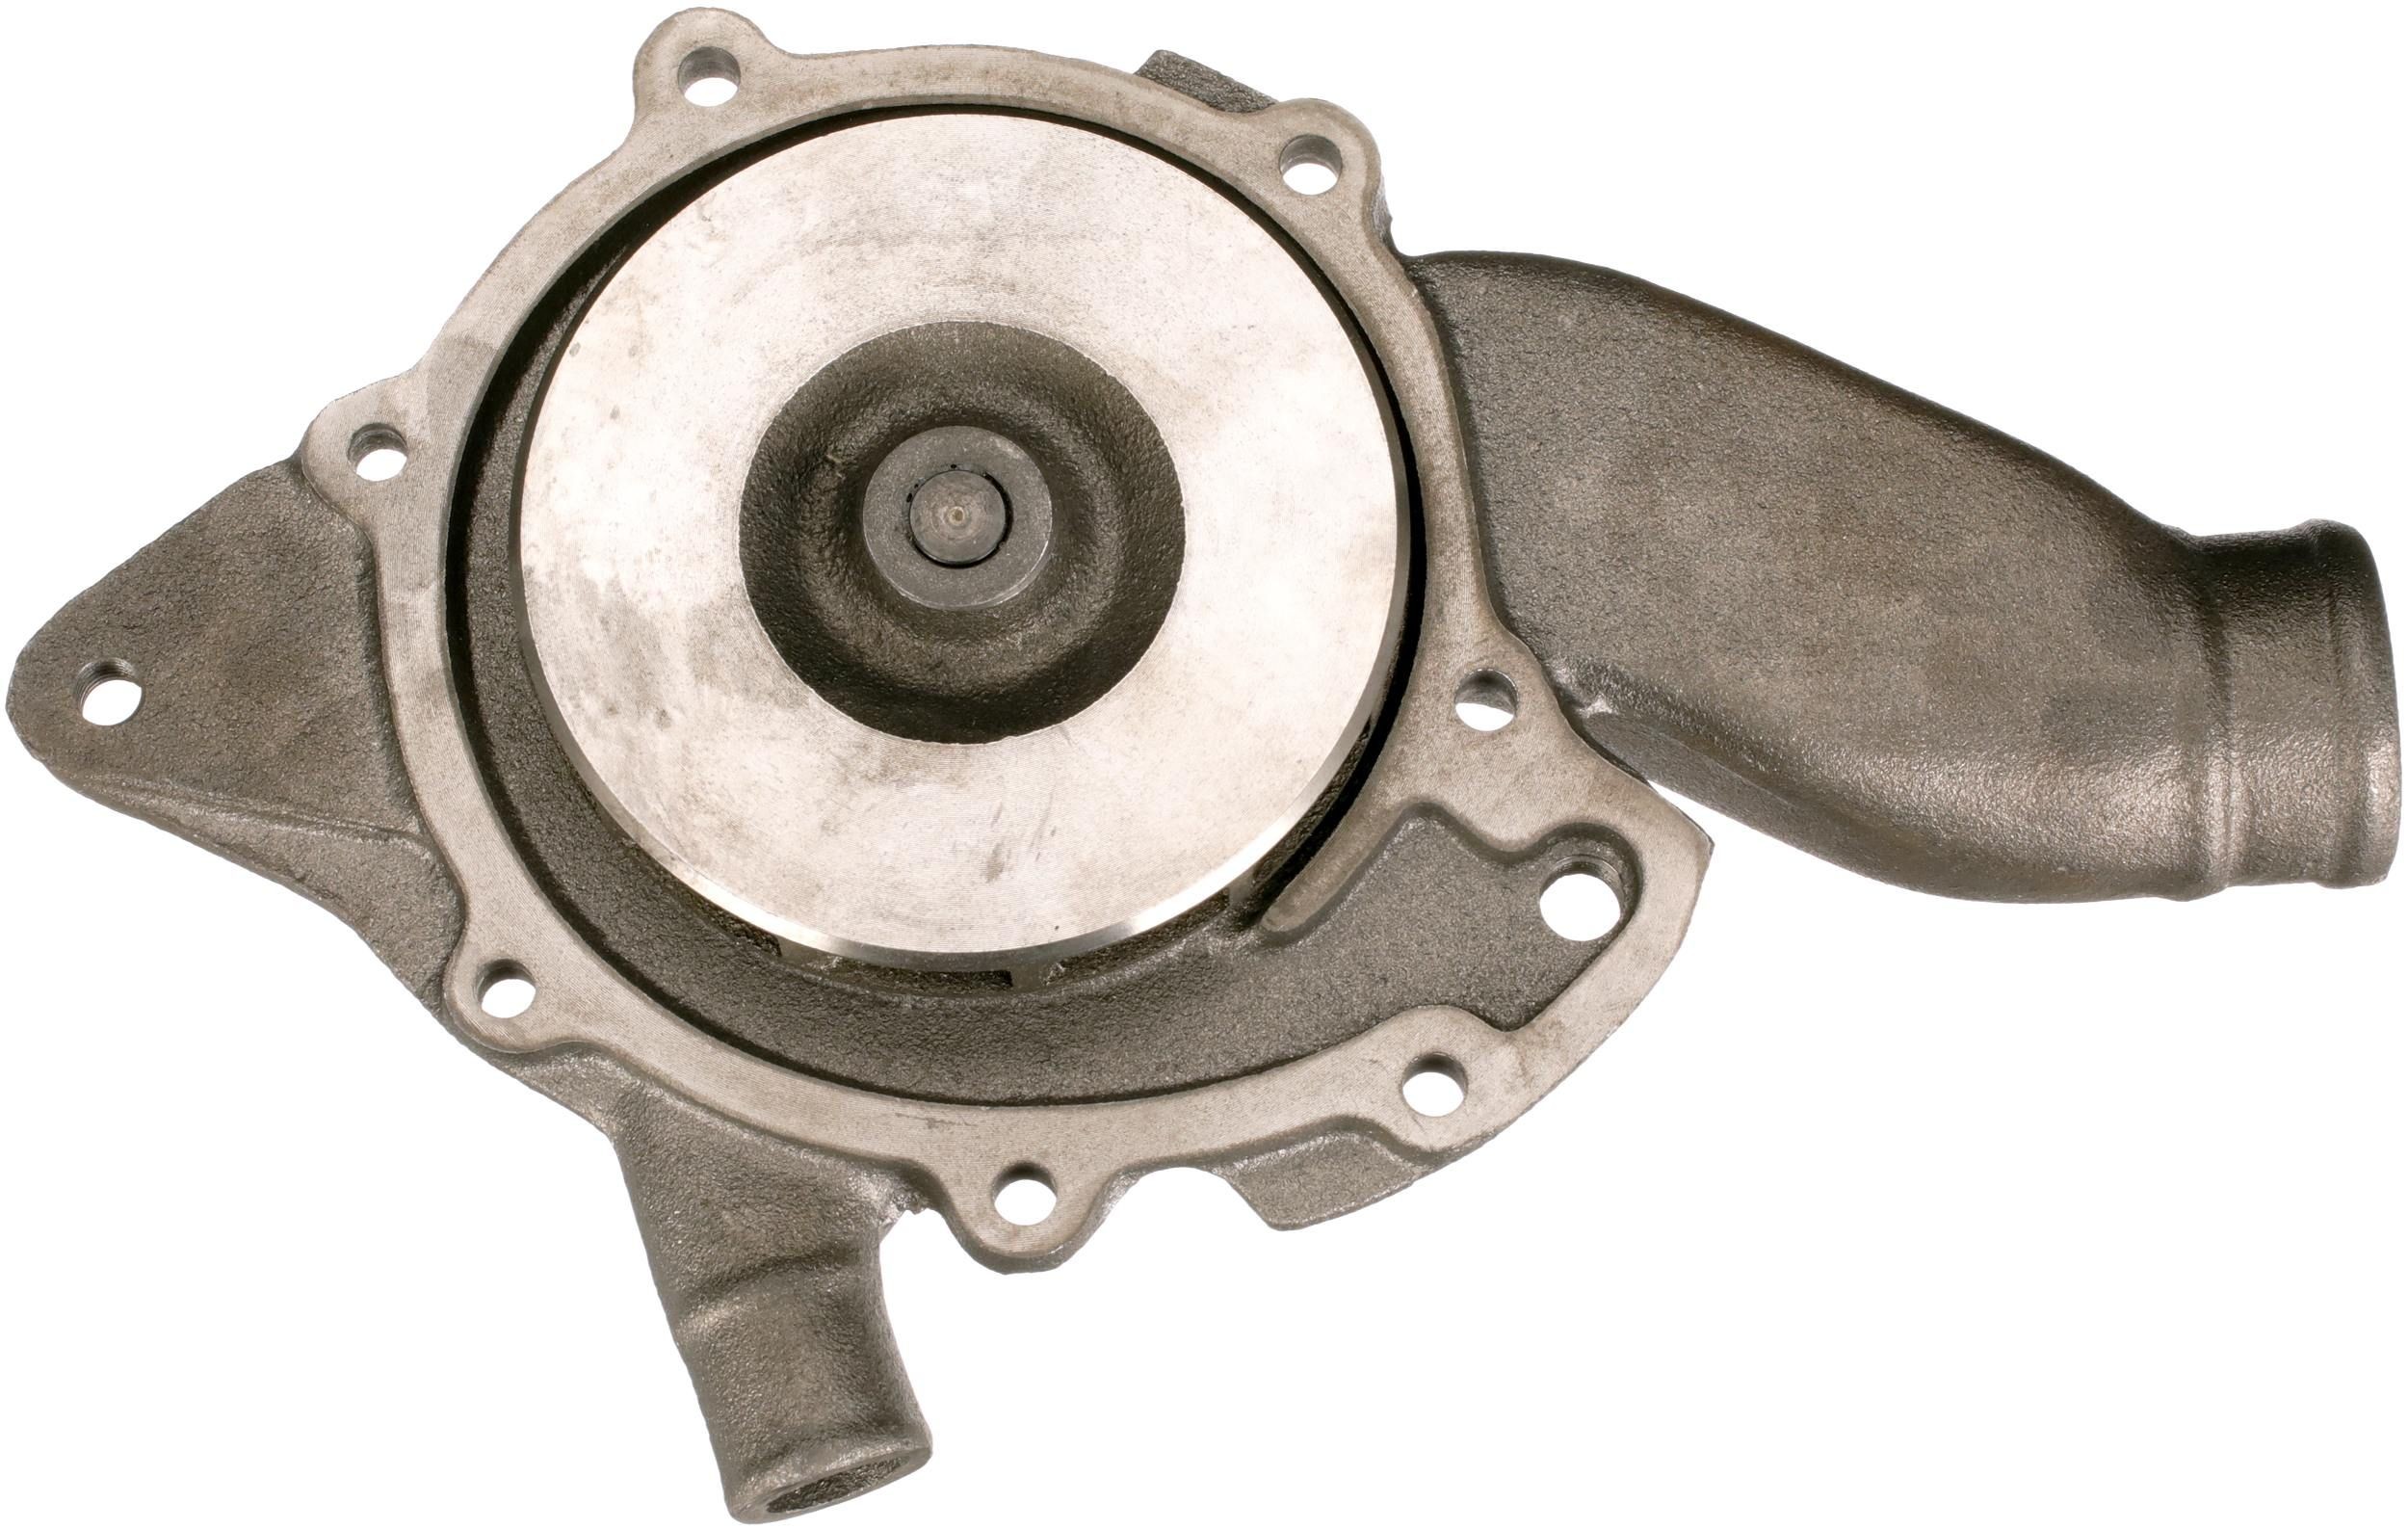 GATES 7702-15102 Water pump Metal, for v-belt pulley, with gaskets/seals, with housing